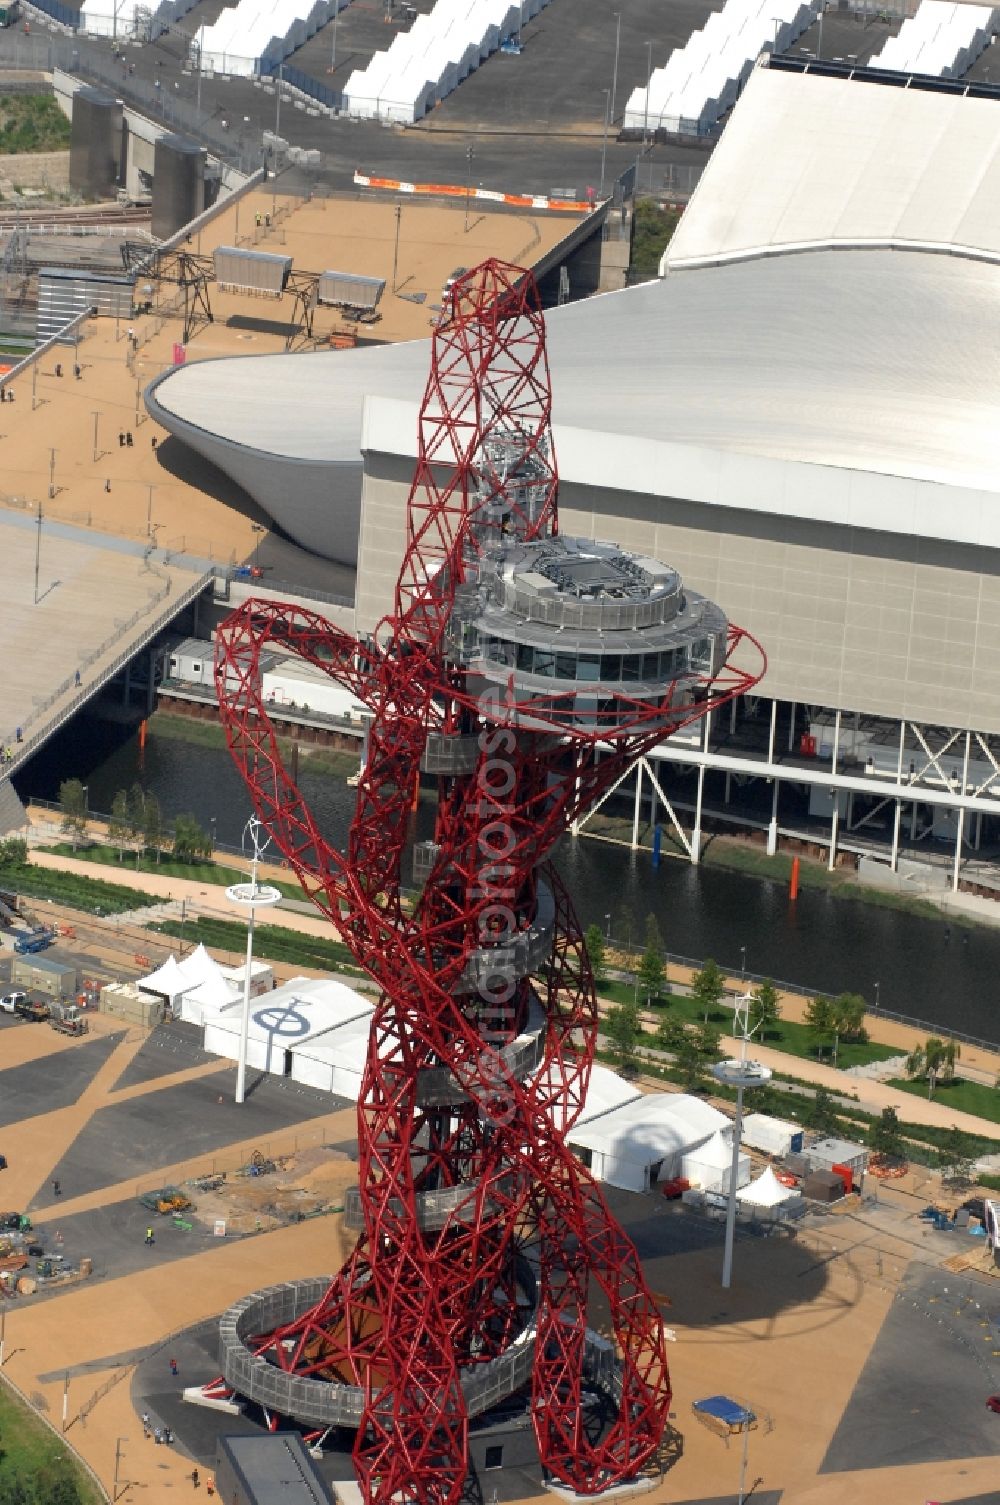 Aerial image London - The ArcelorMittal Orbit is a 115-metre-high ( 377 ft ) observation tower in the Olympic Park in Stratford, London and is intended to be a permanent, lasting legacy of the Olympic and Paralympic Games 2012 in Great Britain